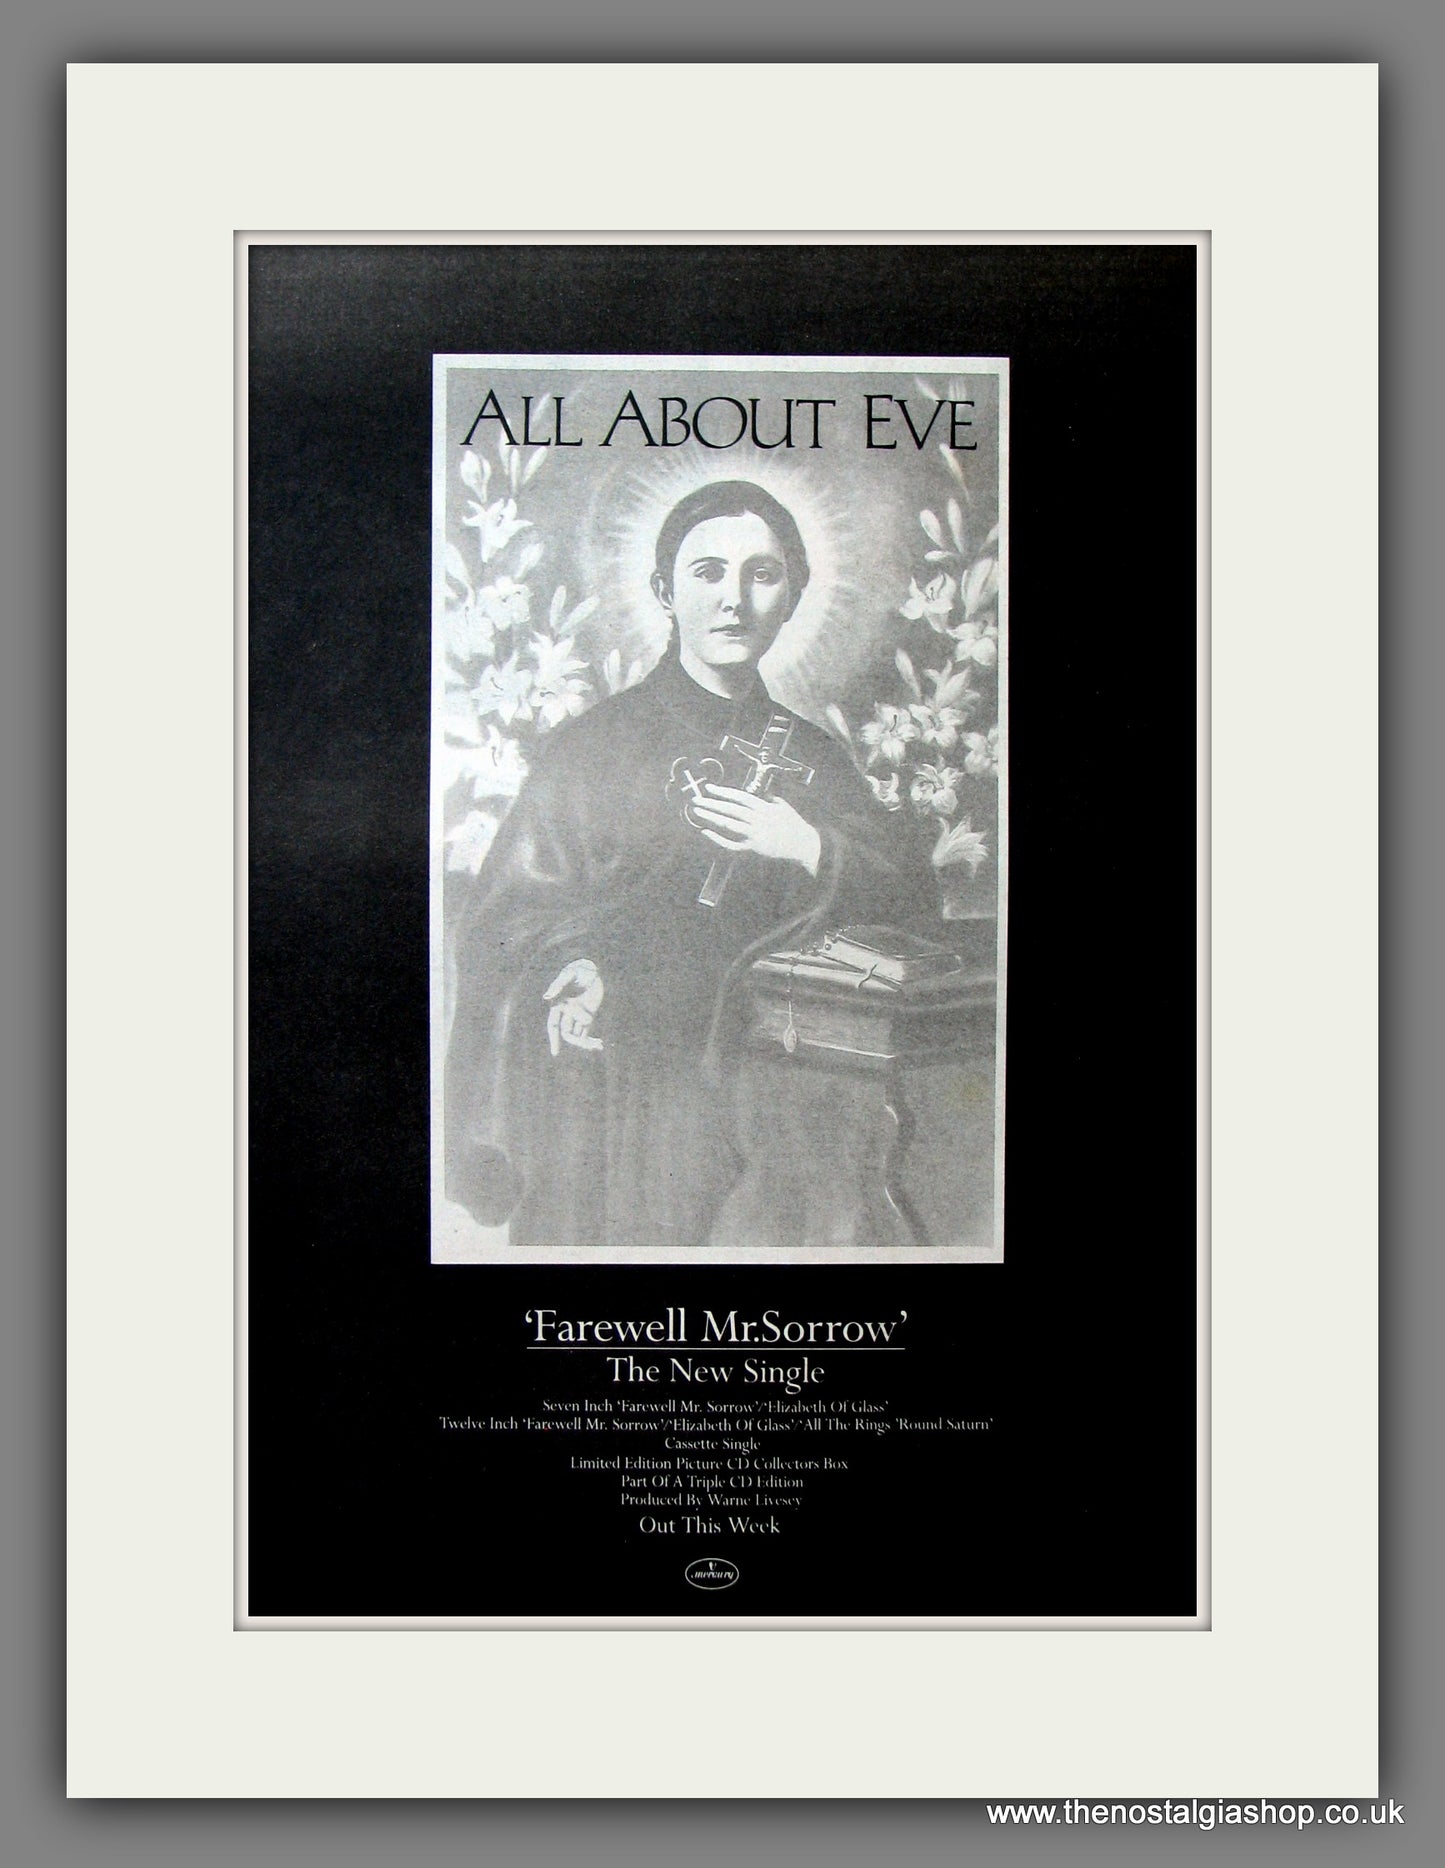 All About Eve. Farewell Mr. Sorrow. Original Advert 1991 (ref AD11524)